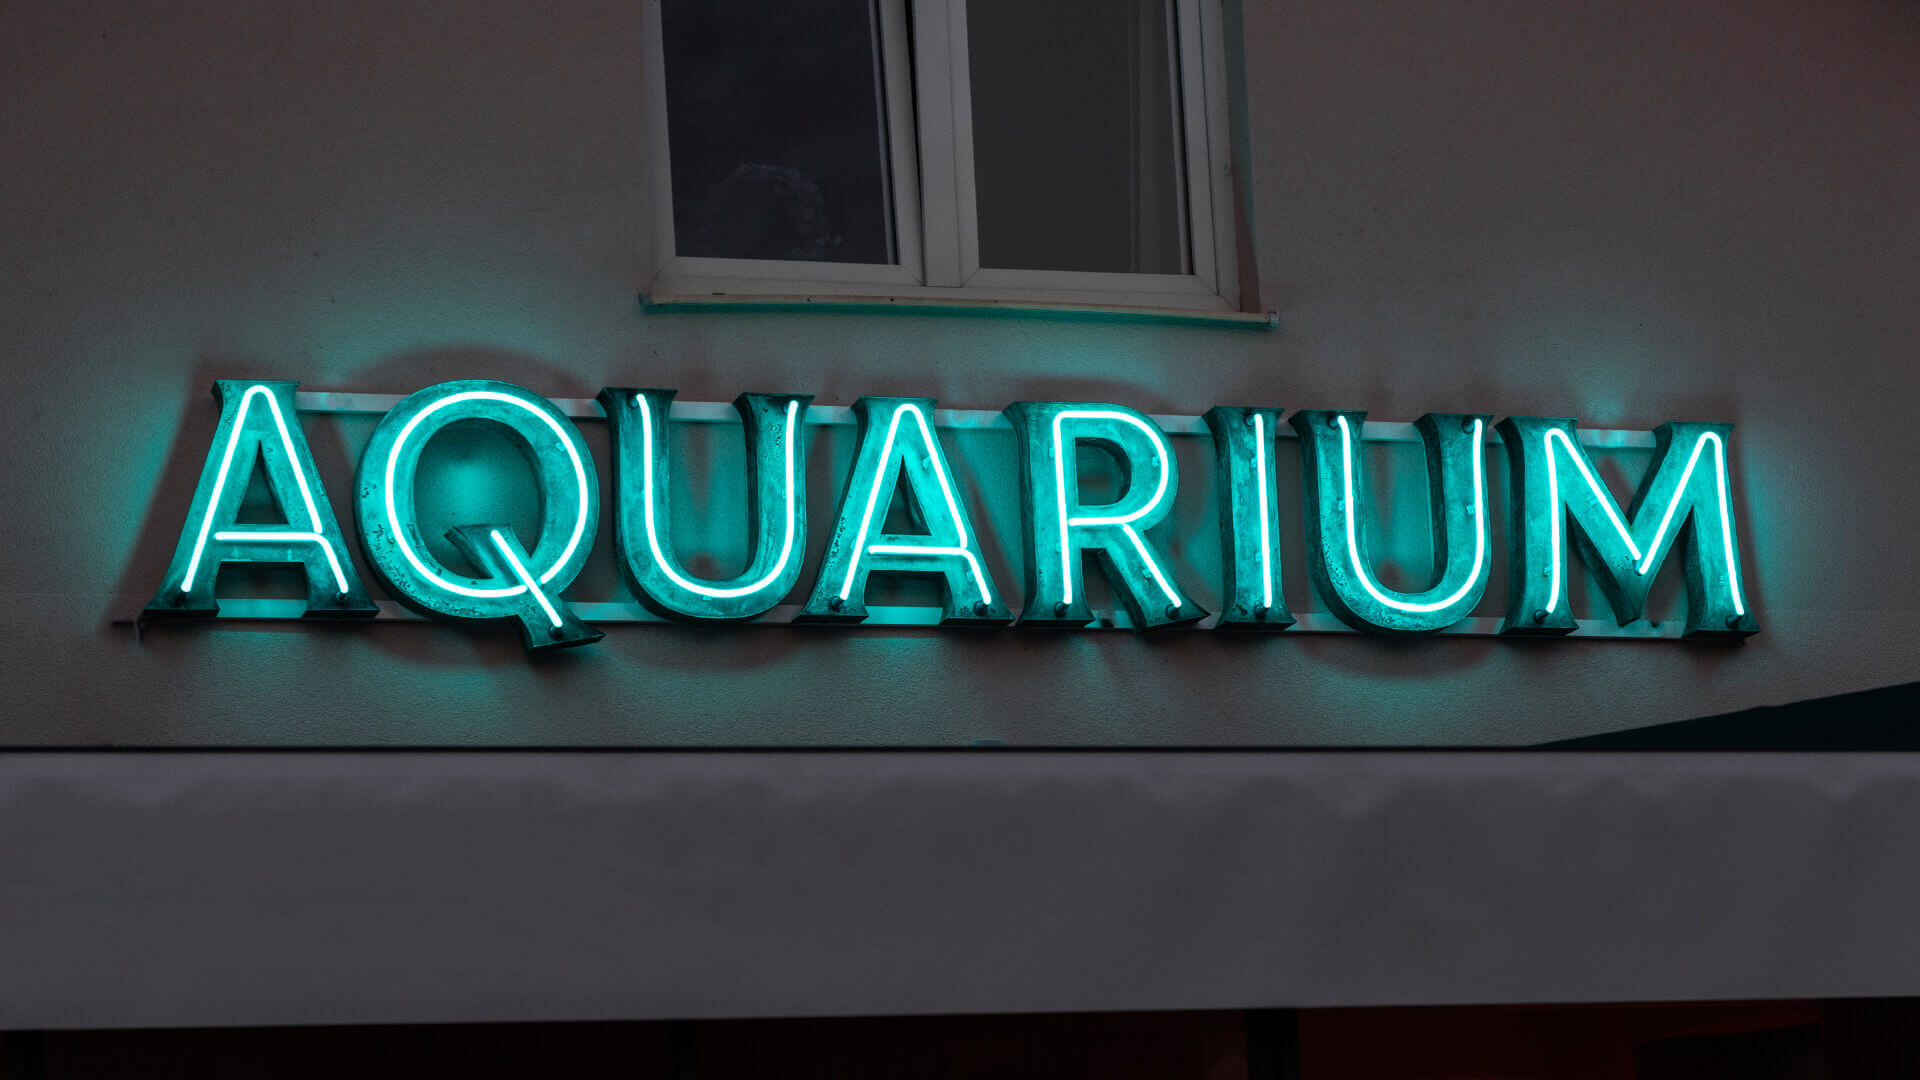 aquarium aquarium - aquarium-neon-on-the-wall-of-the-building-literature-covered-patina-neon-over-the-entry-to-restaurant-green-neon-on-the-elevation-of-the-building-neon-on-the-stage-under-glass (31).jpg